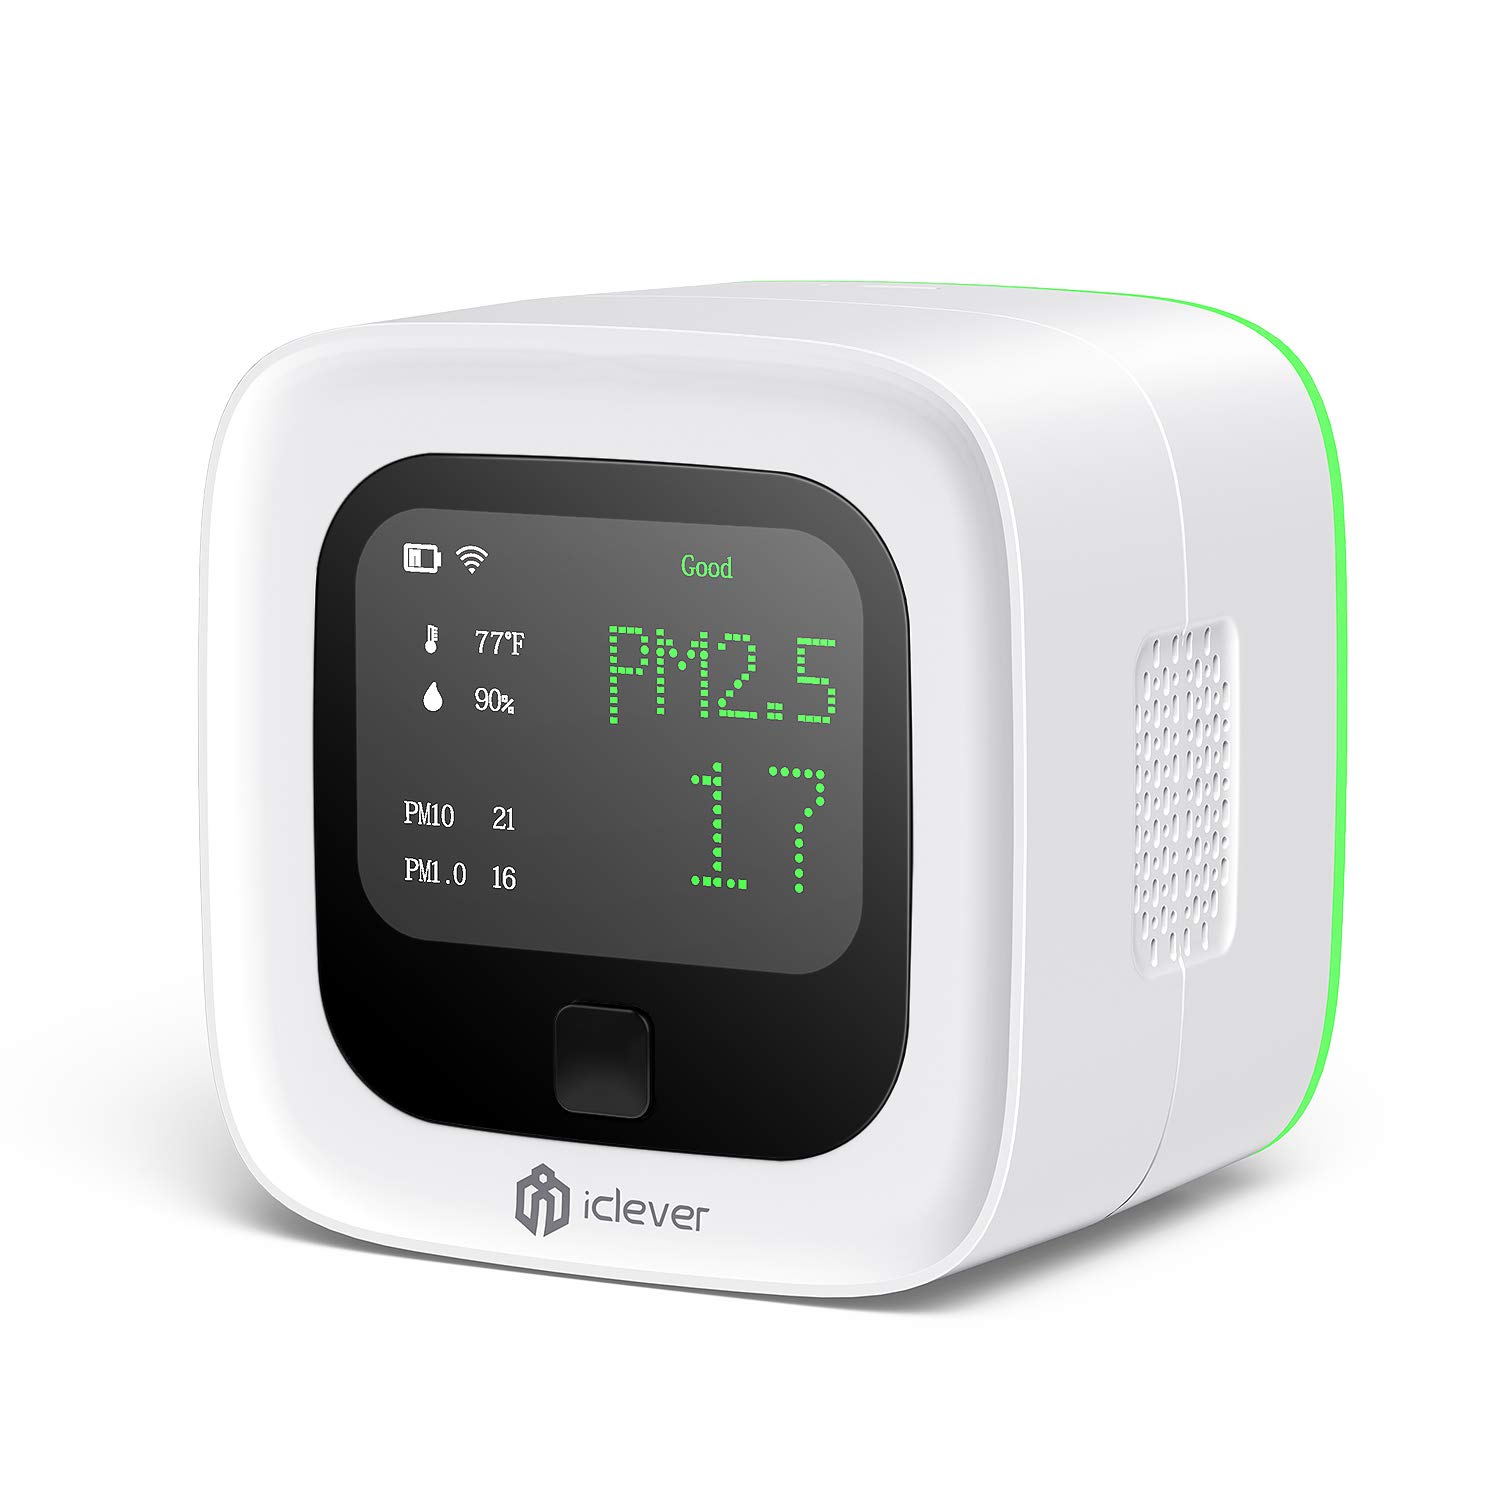 Air Quality Monitor-Indoor Outdoor Air Quality Monitor PM2.5 Detector Tester